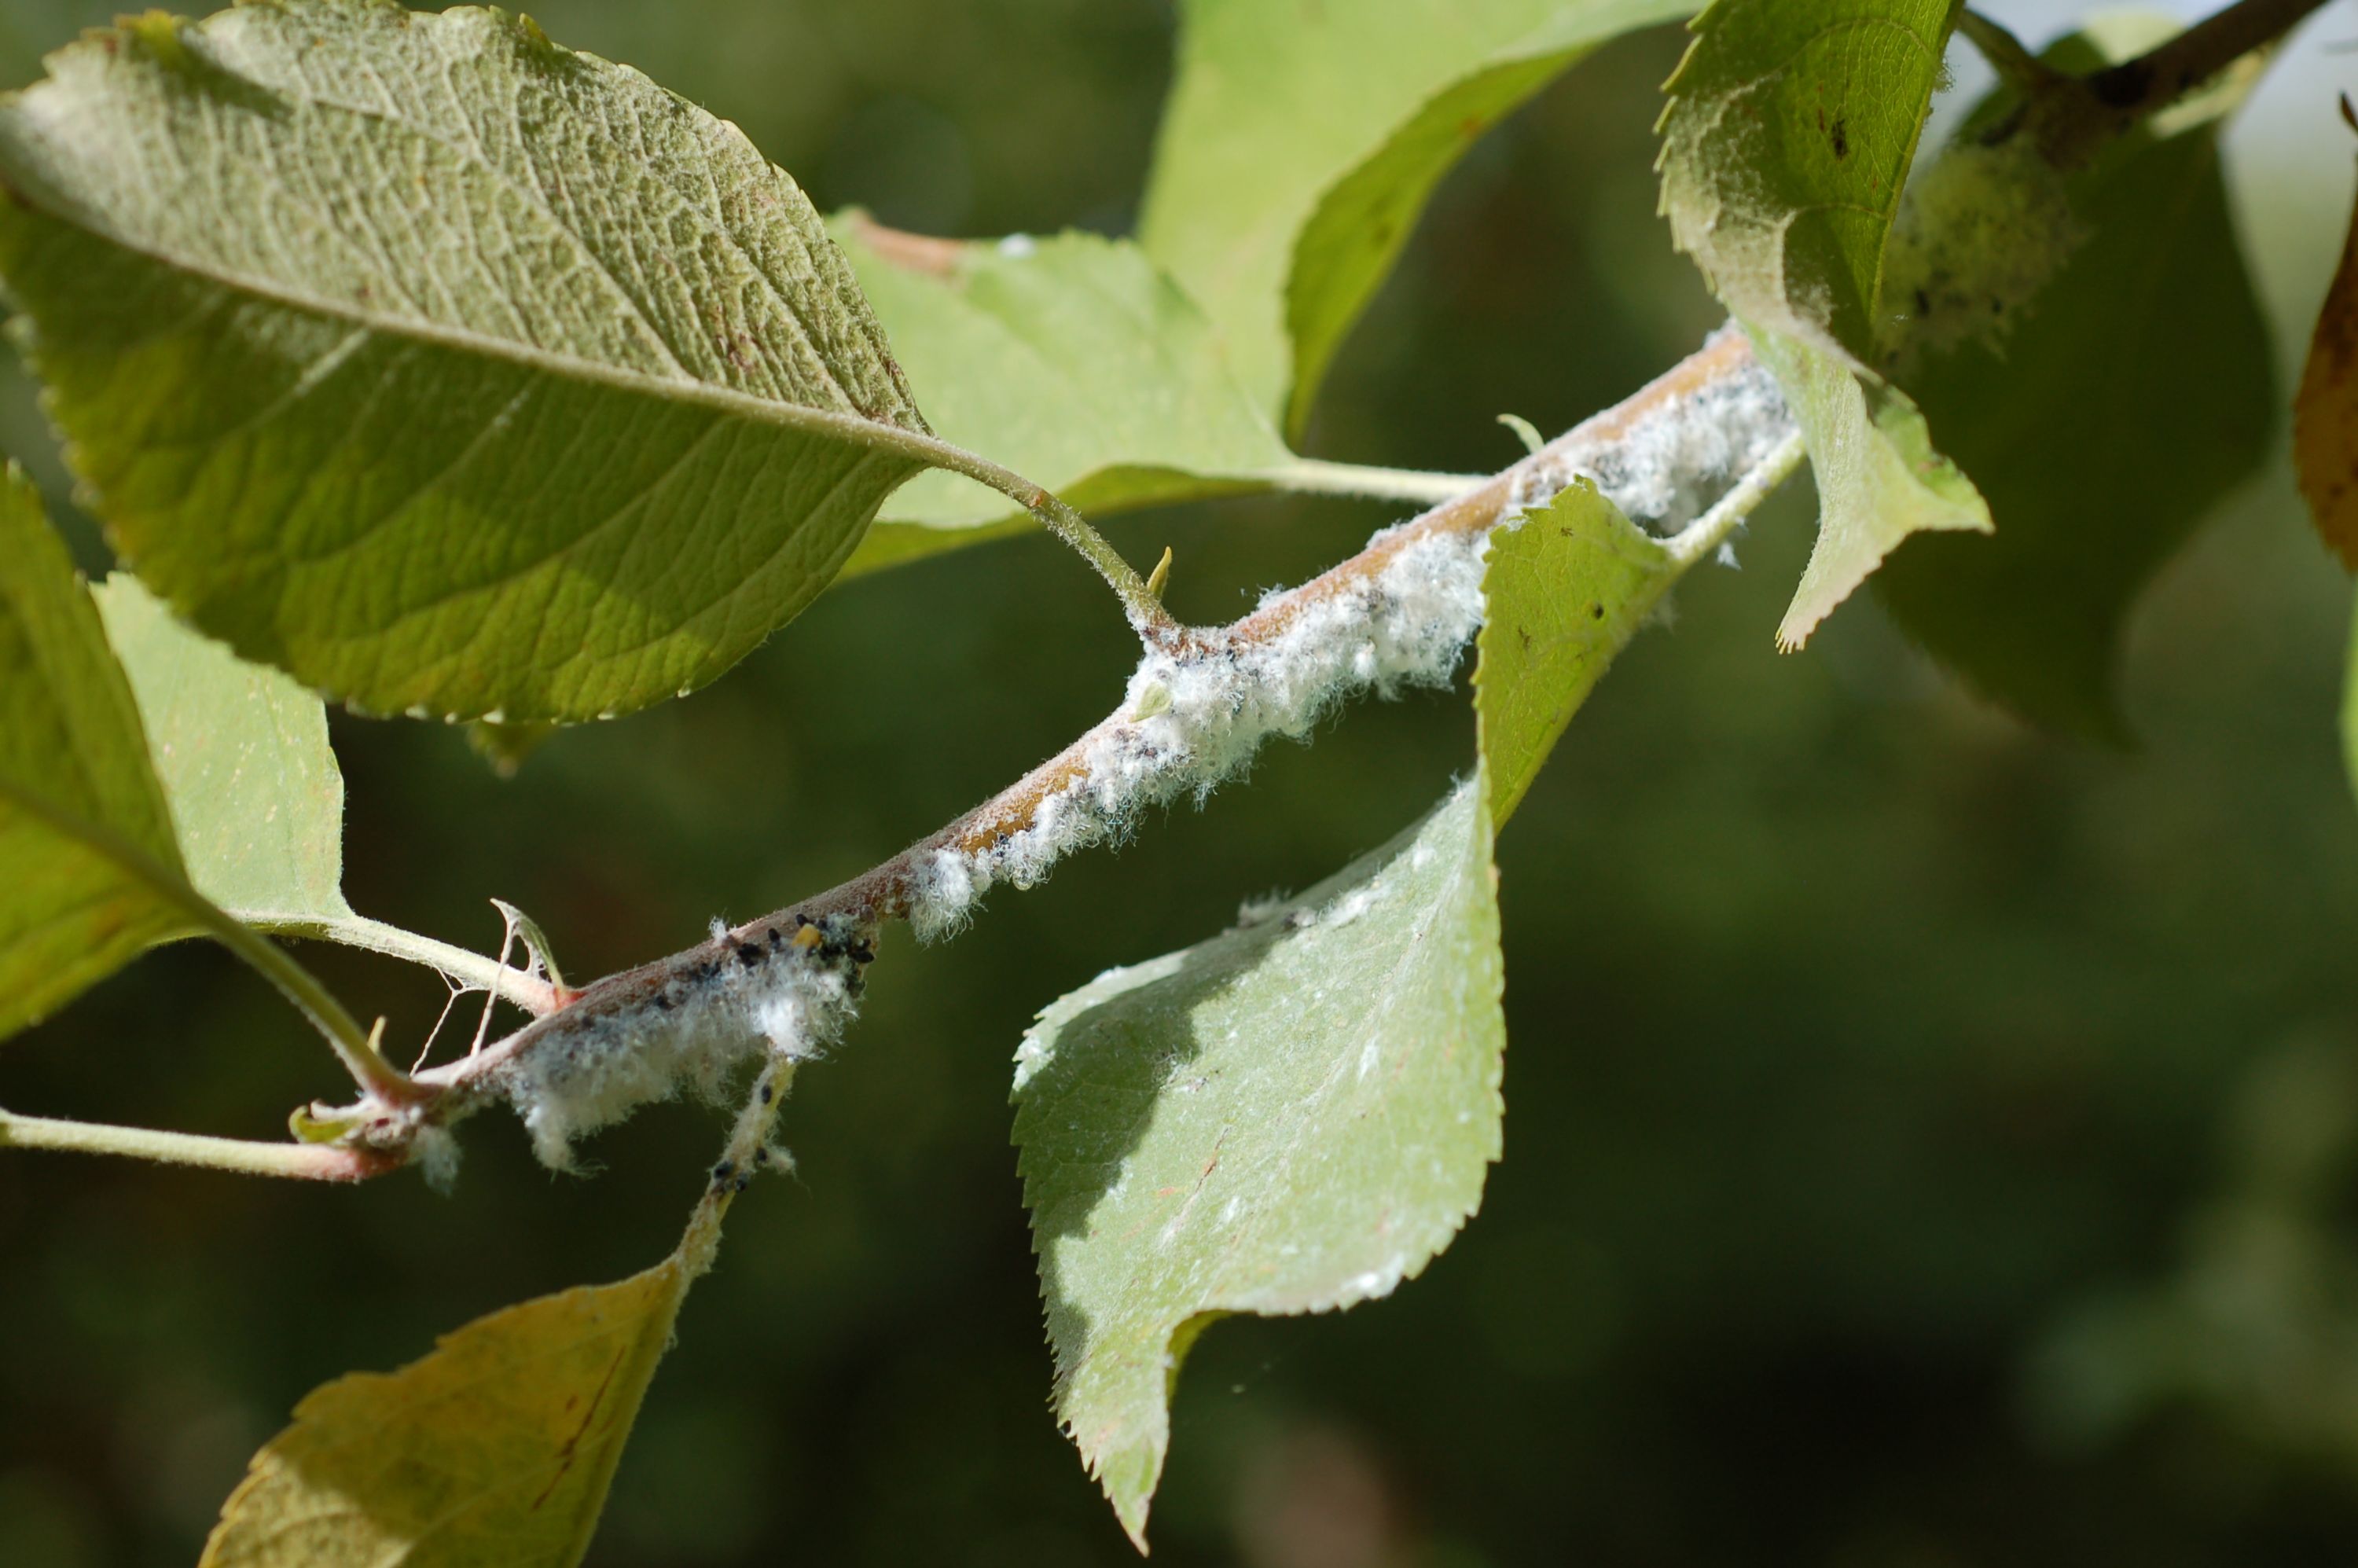 Woolly apple aphids